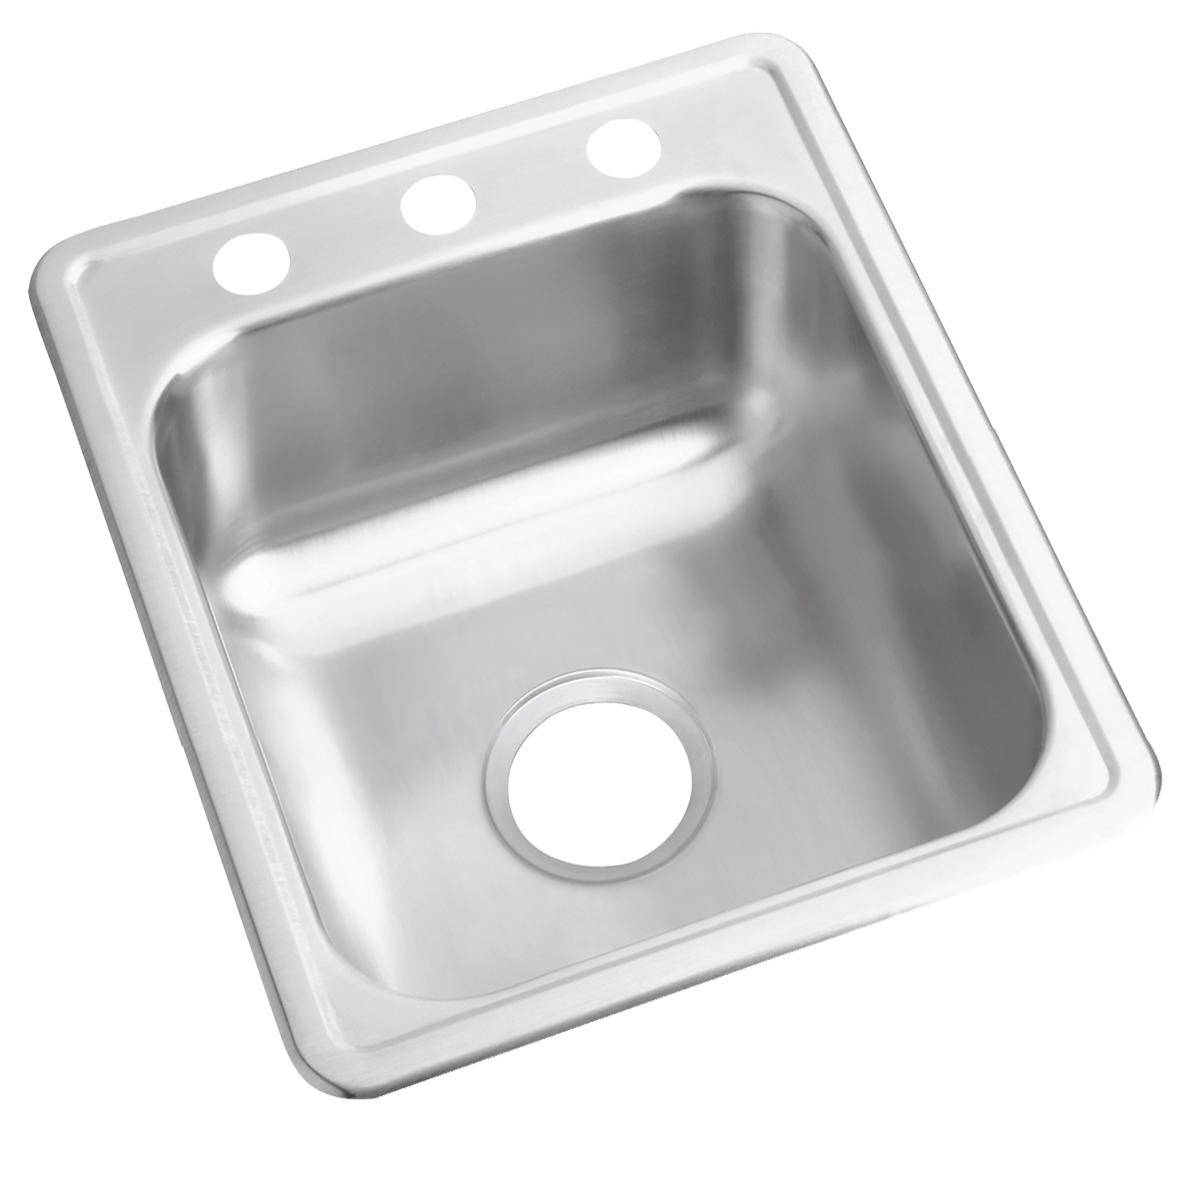 Elkay D11721 Dayton 17-Inch by 21-1/4-Inch Stainless Steel Three-Hole Bar Sink Satin Finish 